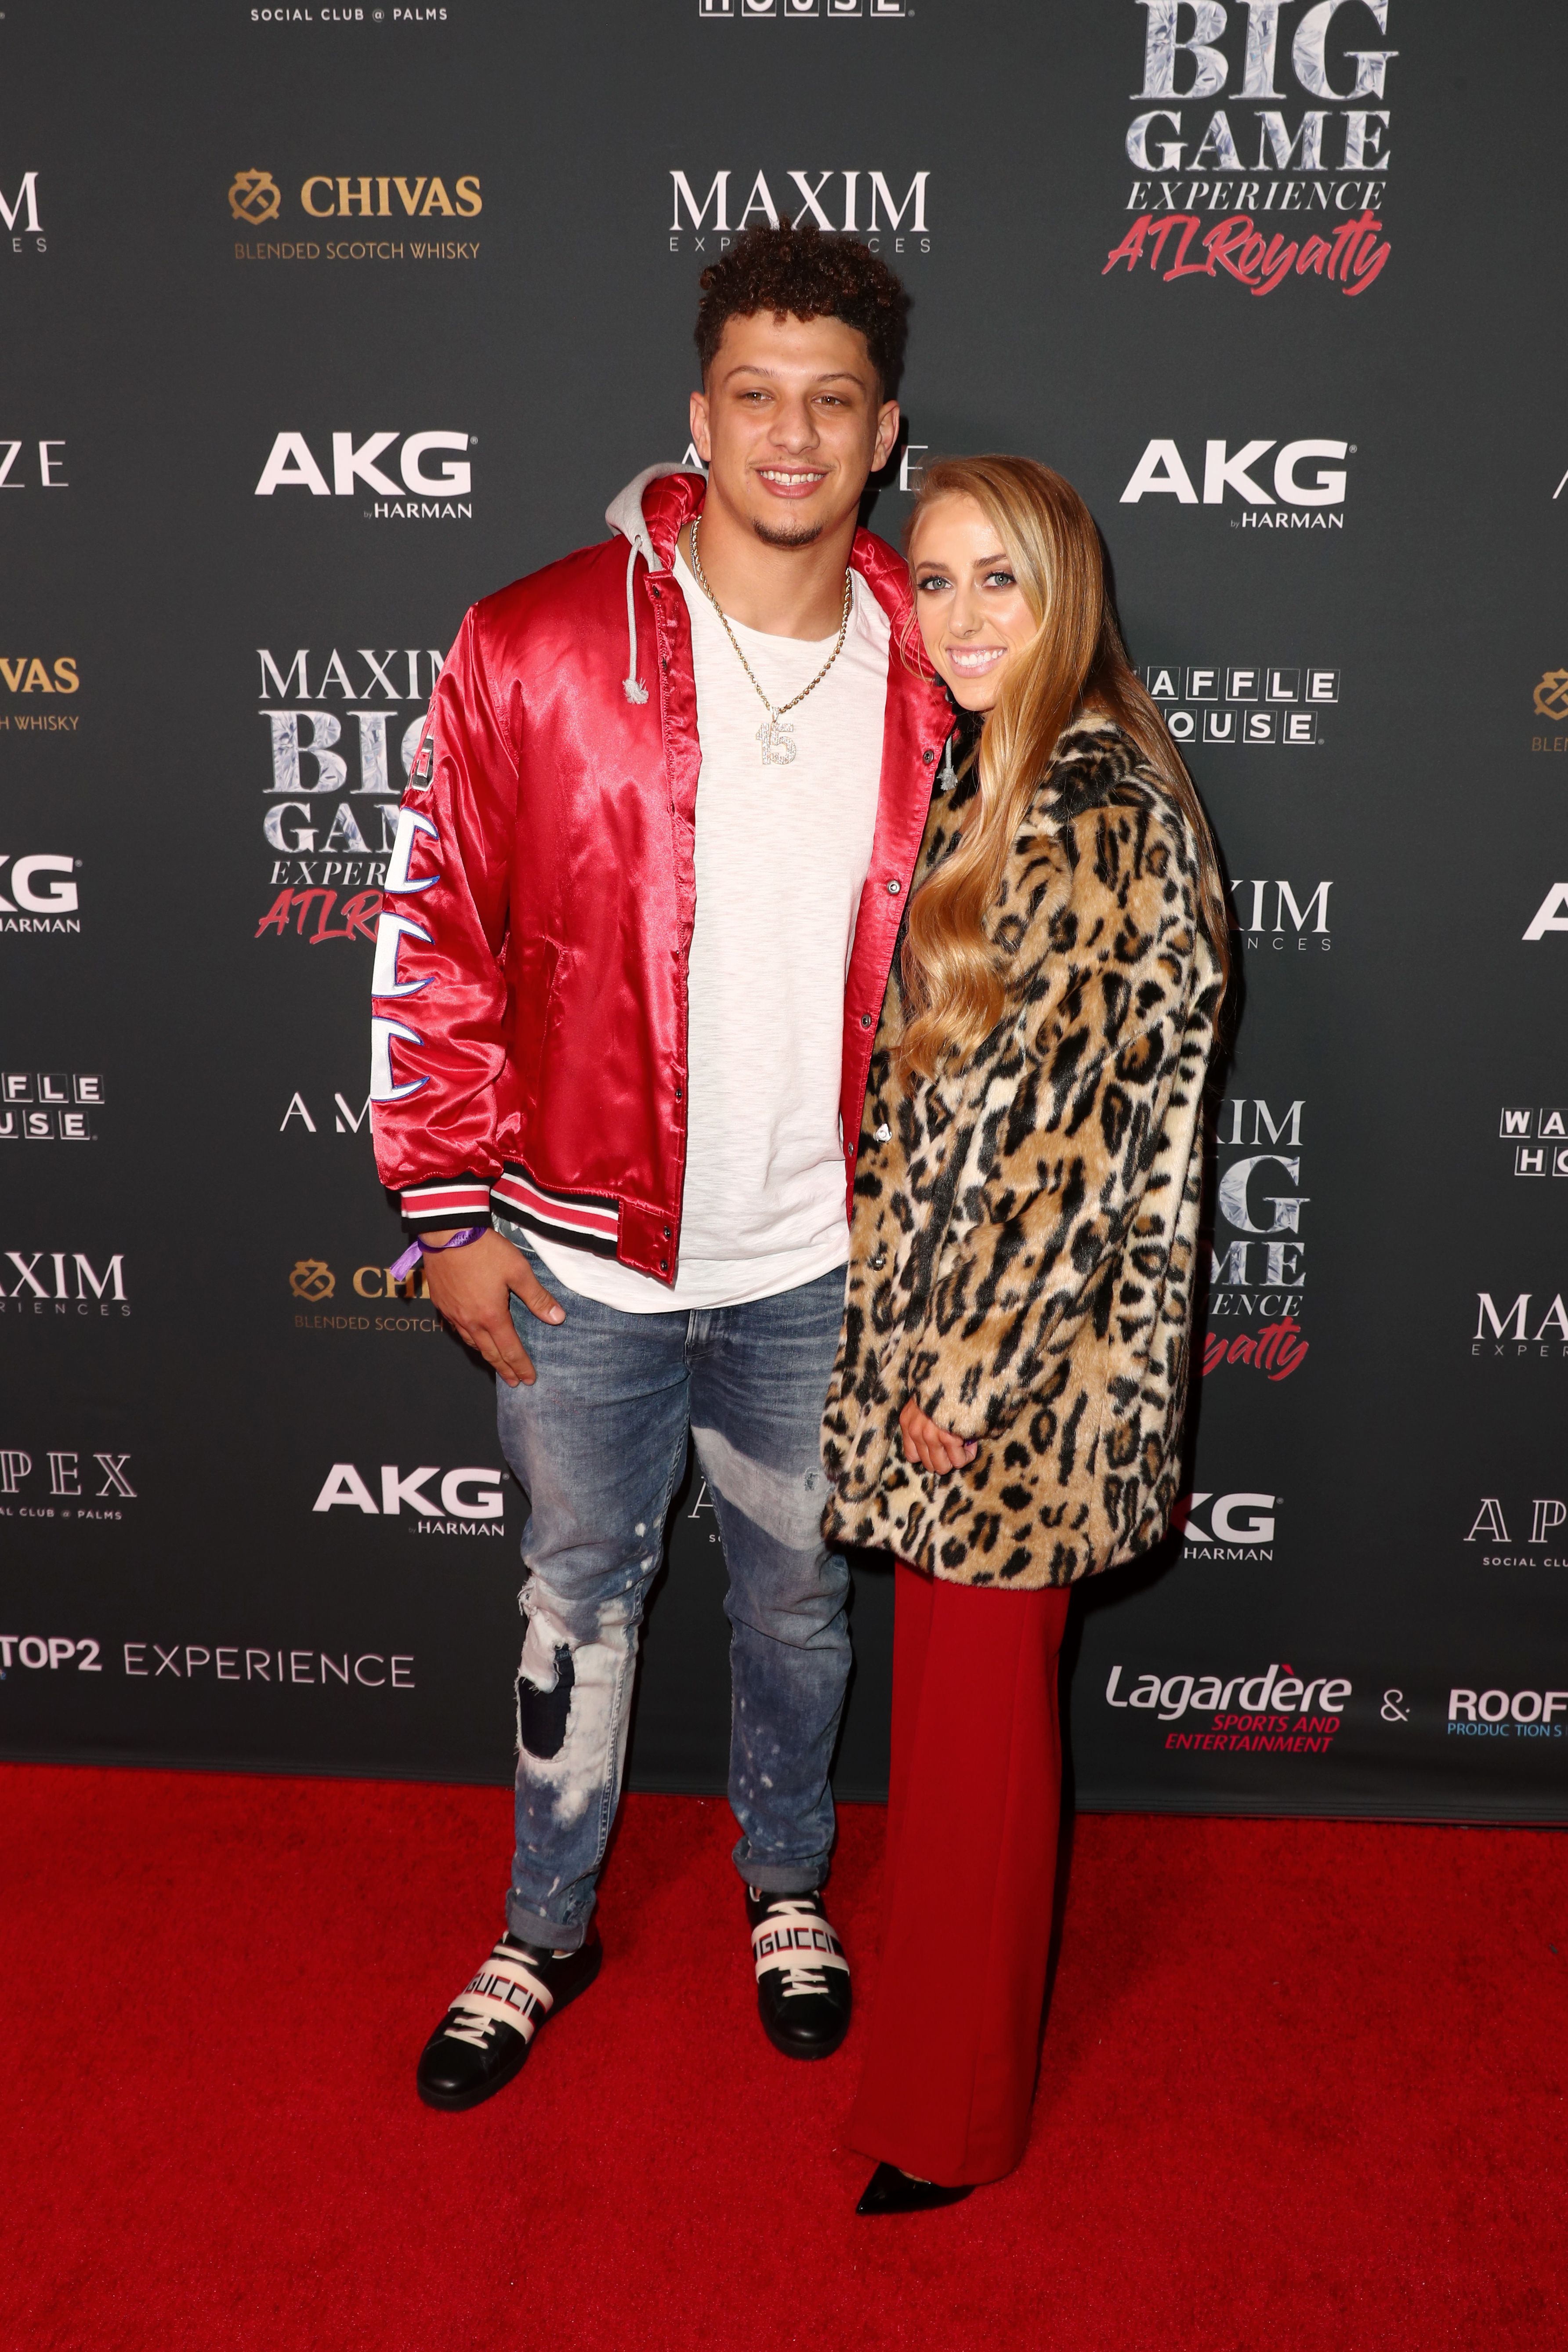 Patrick Mahomes II (L) and Brittany Matthews at The Maxim Big Game Experience on February 02, 2019 | Getty Images